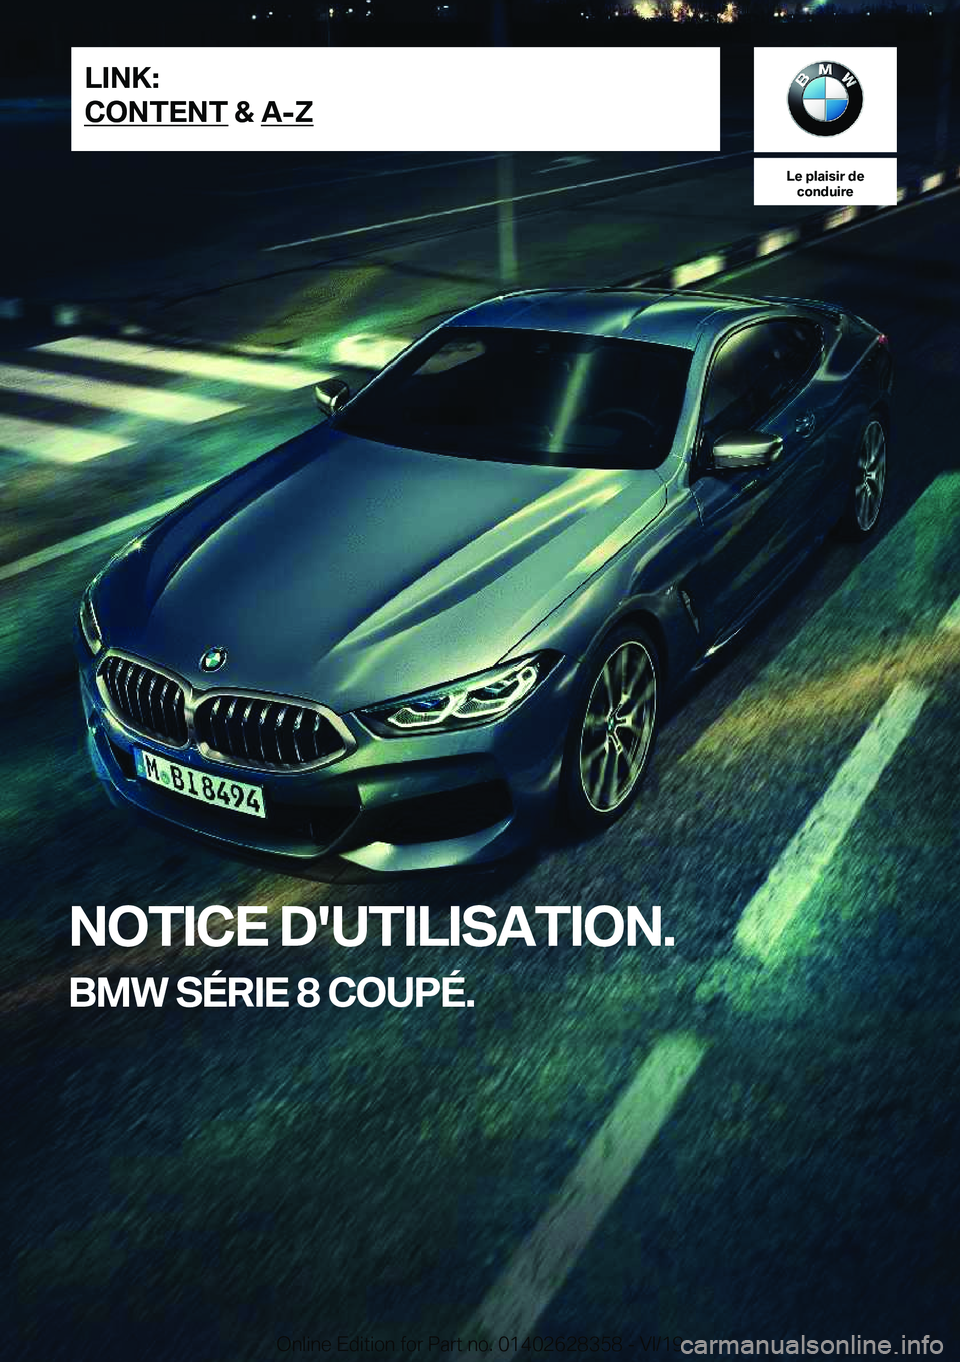 BMW 8 SERIES COUPE 2020  Notices Demploi (in French) �L�e��p�l�a�i�s�i�r��d�e�c�o�n�d�u�i�r�e
�N�O�T�I�C�E��D�'�U�T�I�L�I�S�A�T�I�O�N�.
�B�M�W��S�